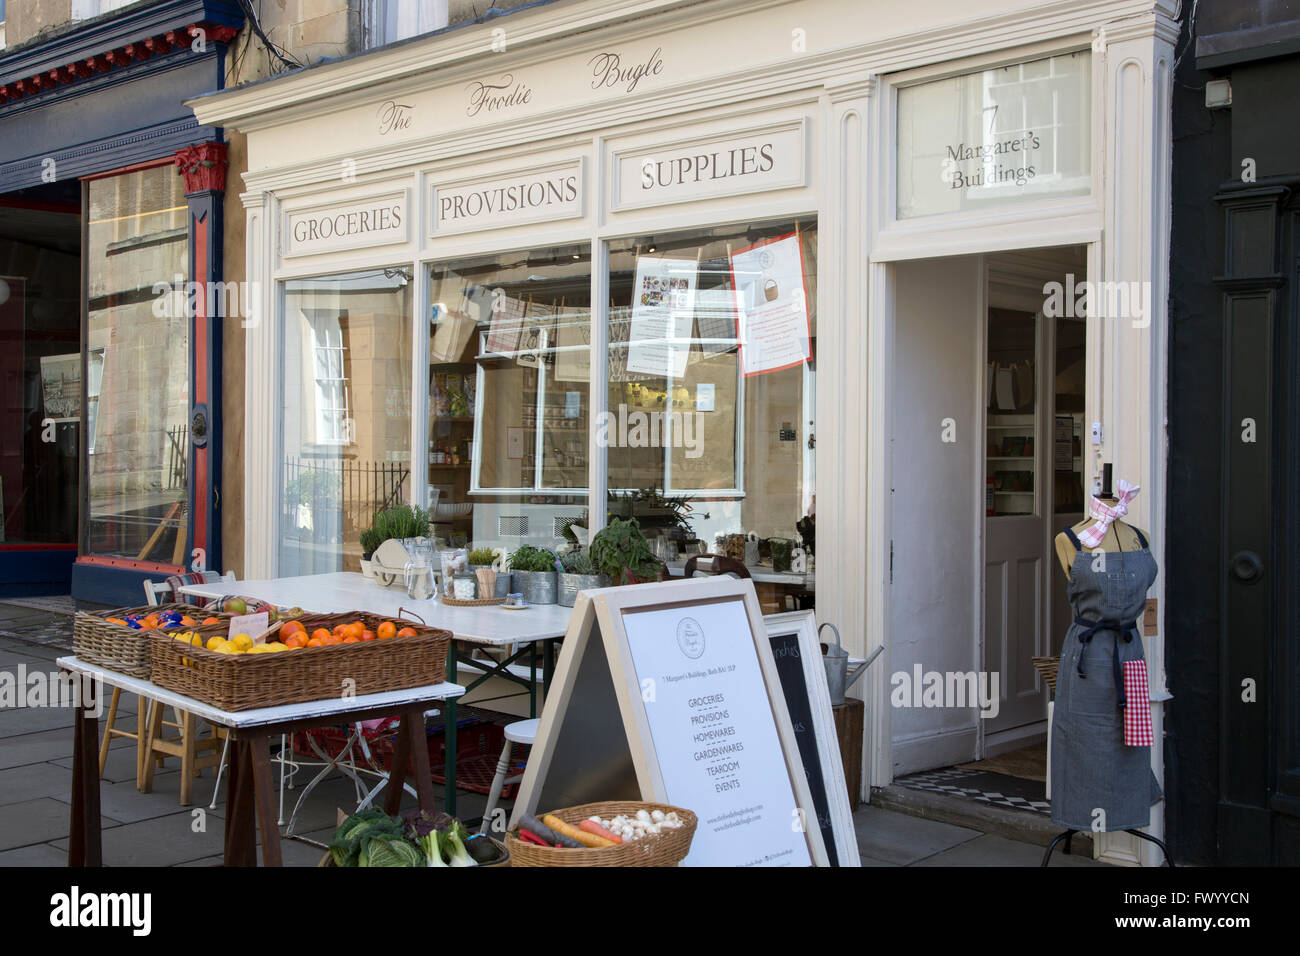 The Foodie Bugle Cafe and Grocer, Bath, England, UK Stock Photo